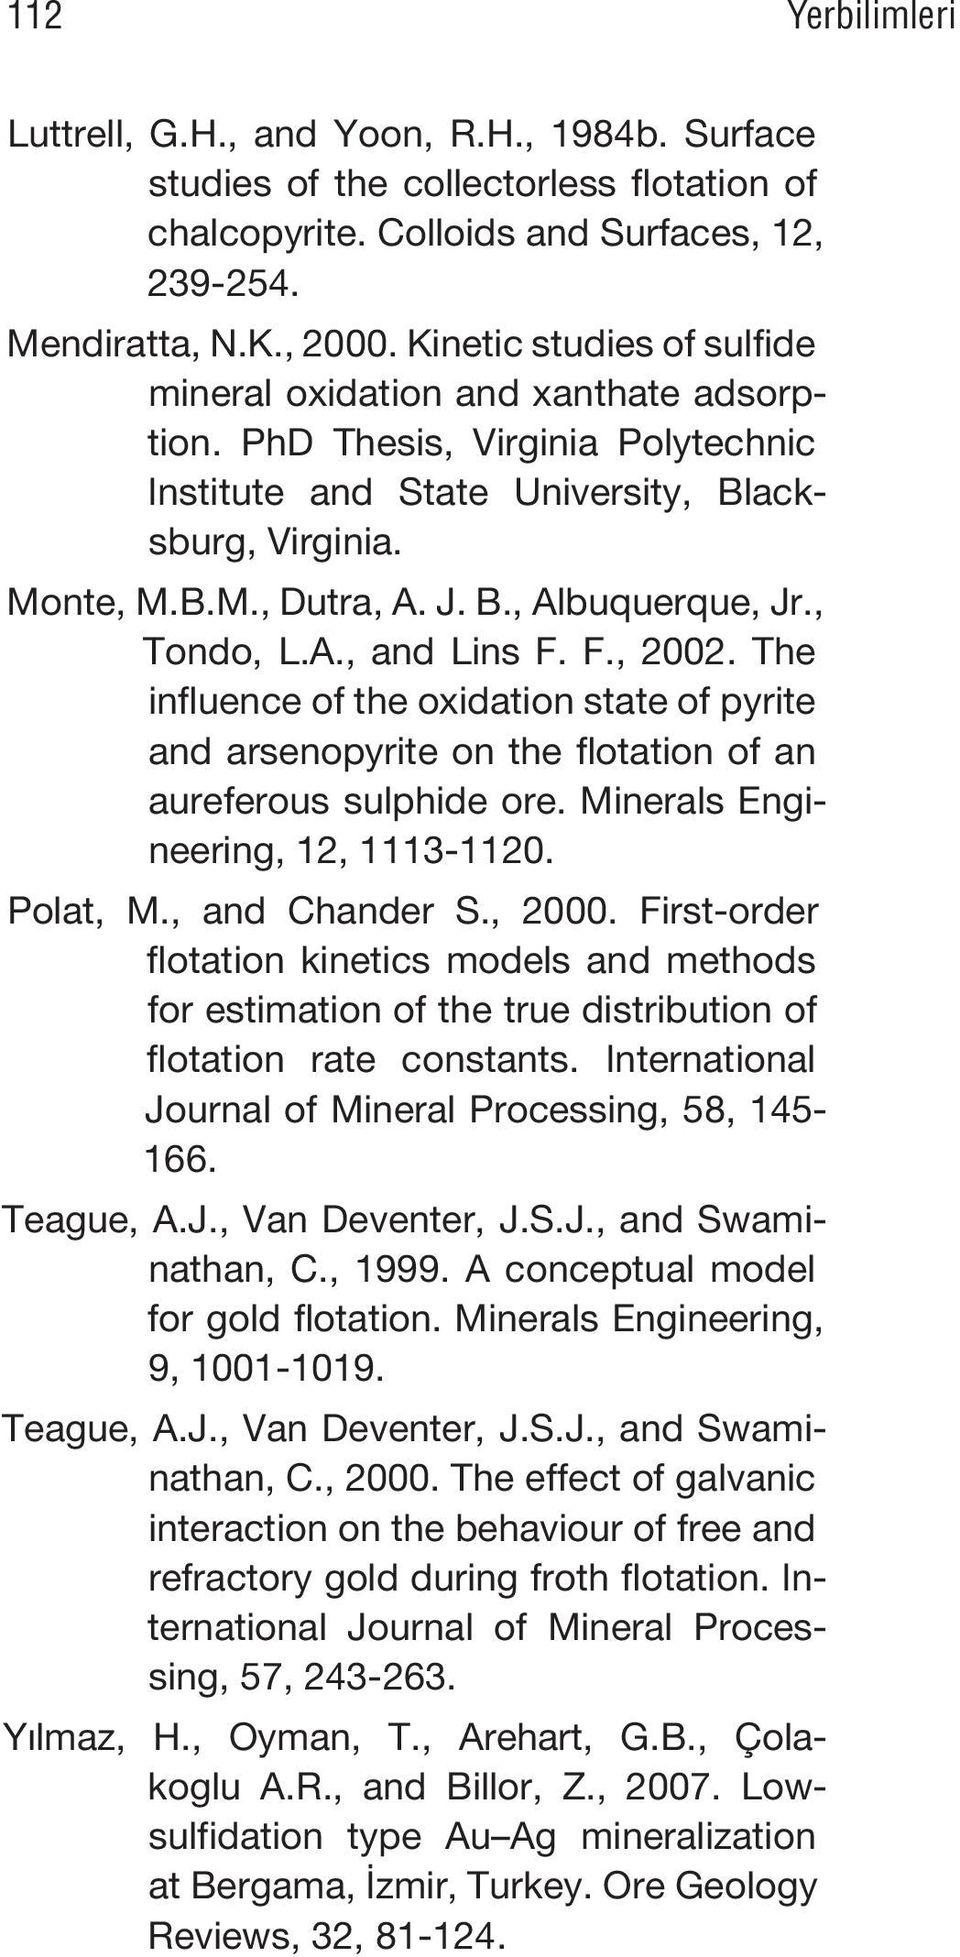 , Tondo, L.A., and Lins F. F., 2002. The influence of the oxidation state of pyrite and arsenopyrite on the flotation of an aureferous sulphide ore. Minerals Engineering, 12, 1113-1120. Polat, M.